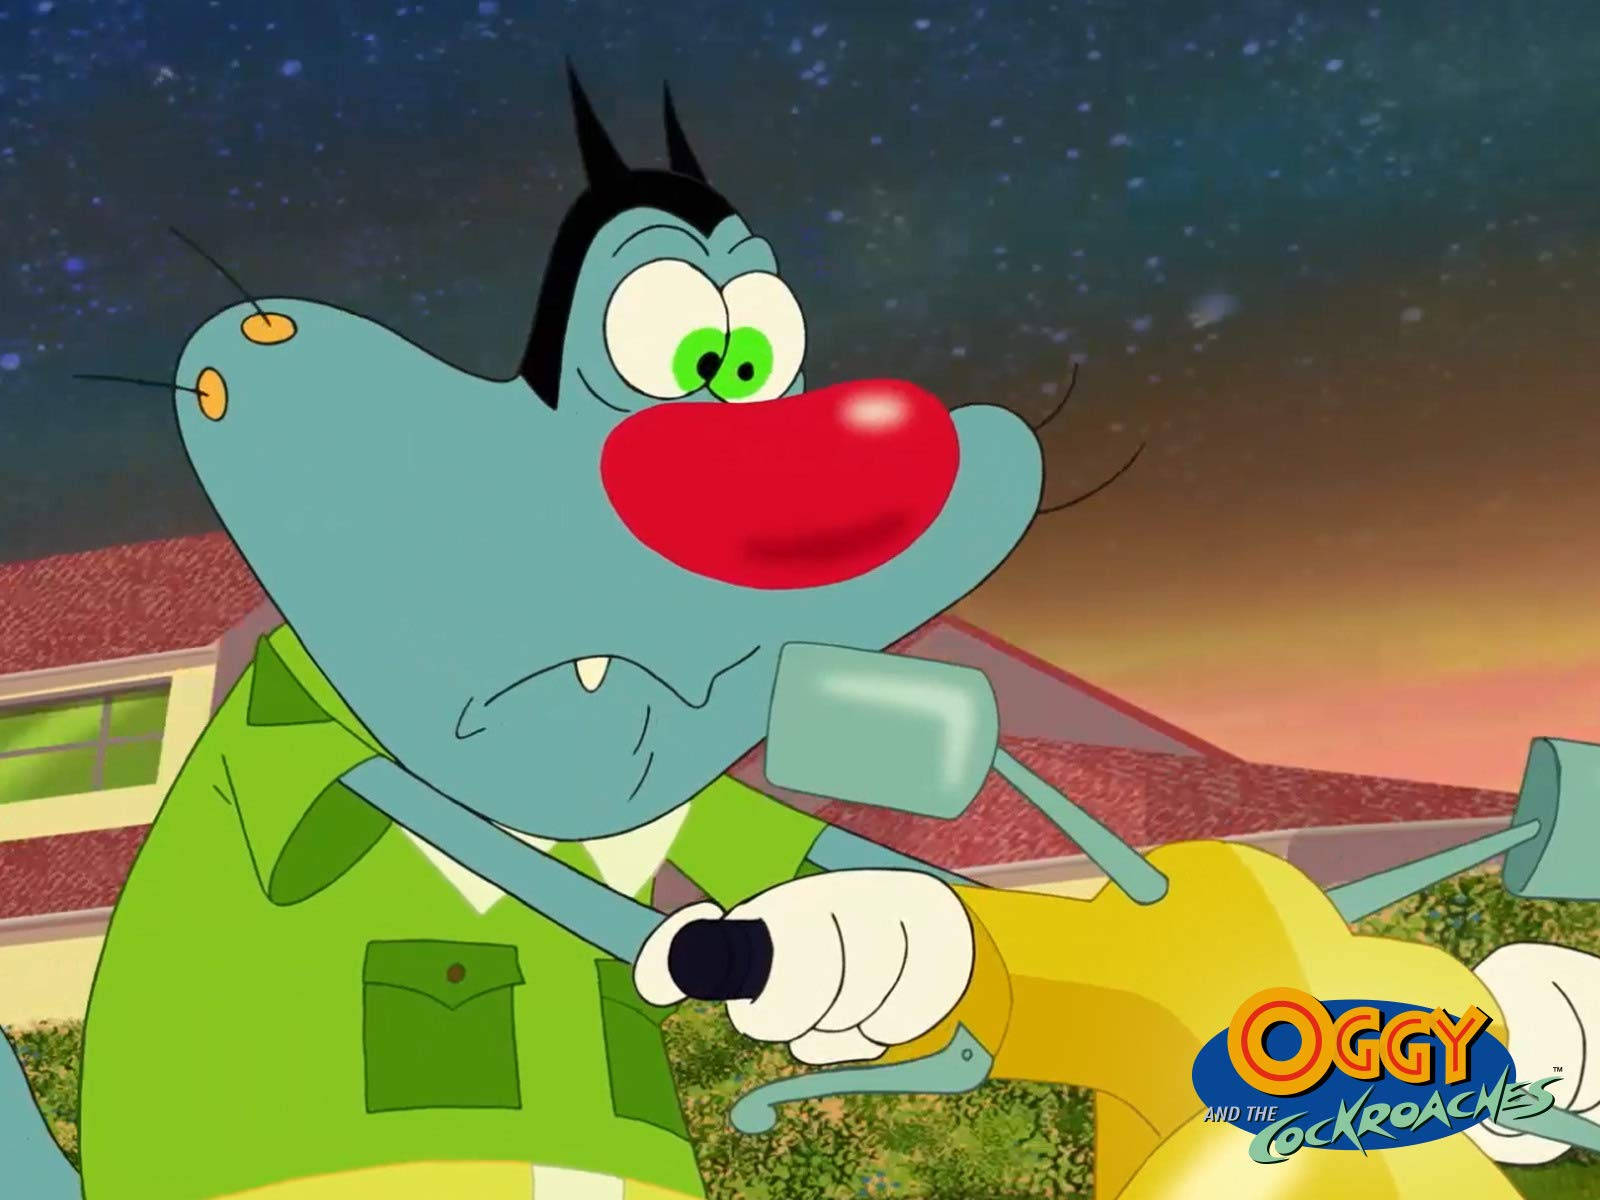 Free Oggy And The Cockroaches Wallpaper Downloads, [100+] Oggy And The  Cockroaches Wallpapers for FREE 